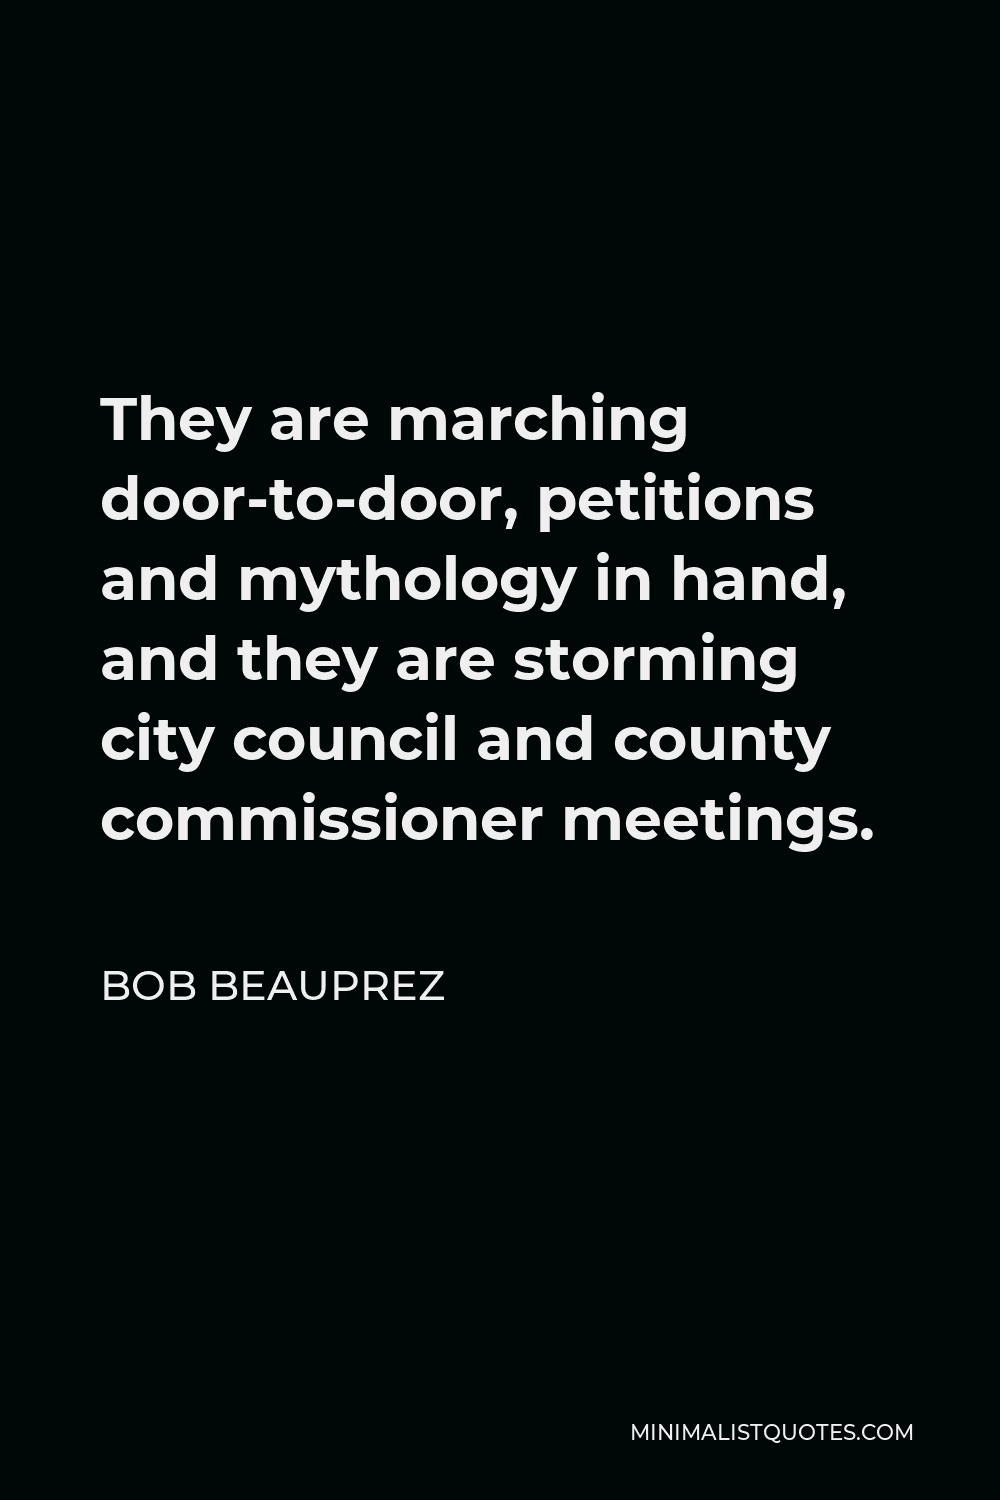 Bob Beauprez Quote - They are marching door-to-door, petitions and mythology in hand, and they are storming city council and county commissioner meetings.